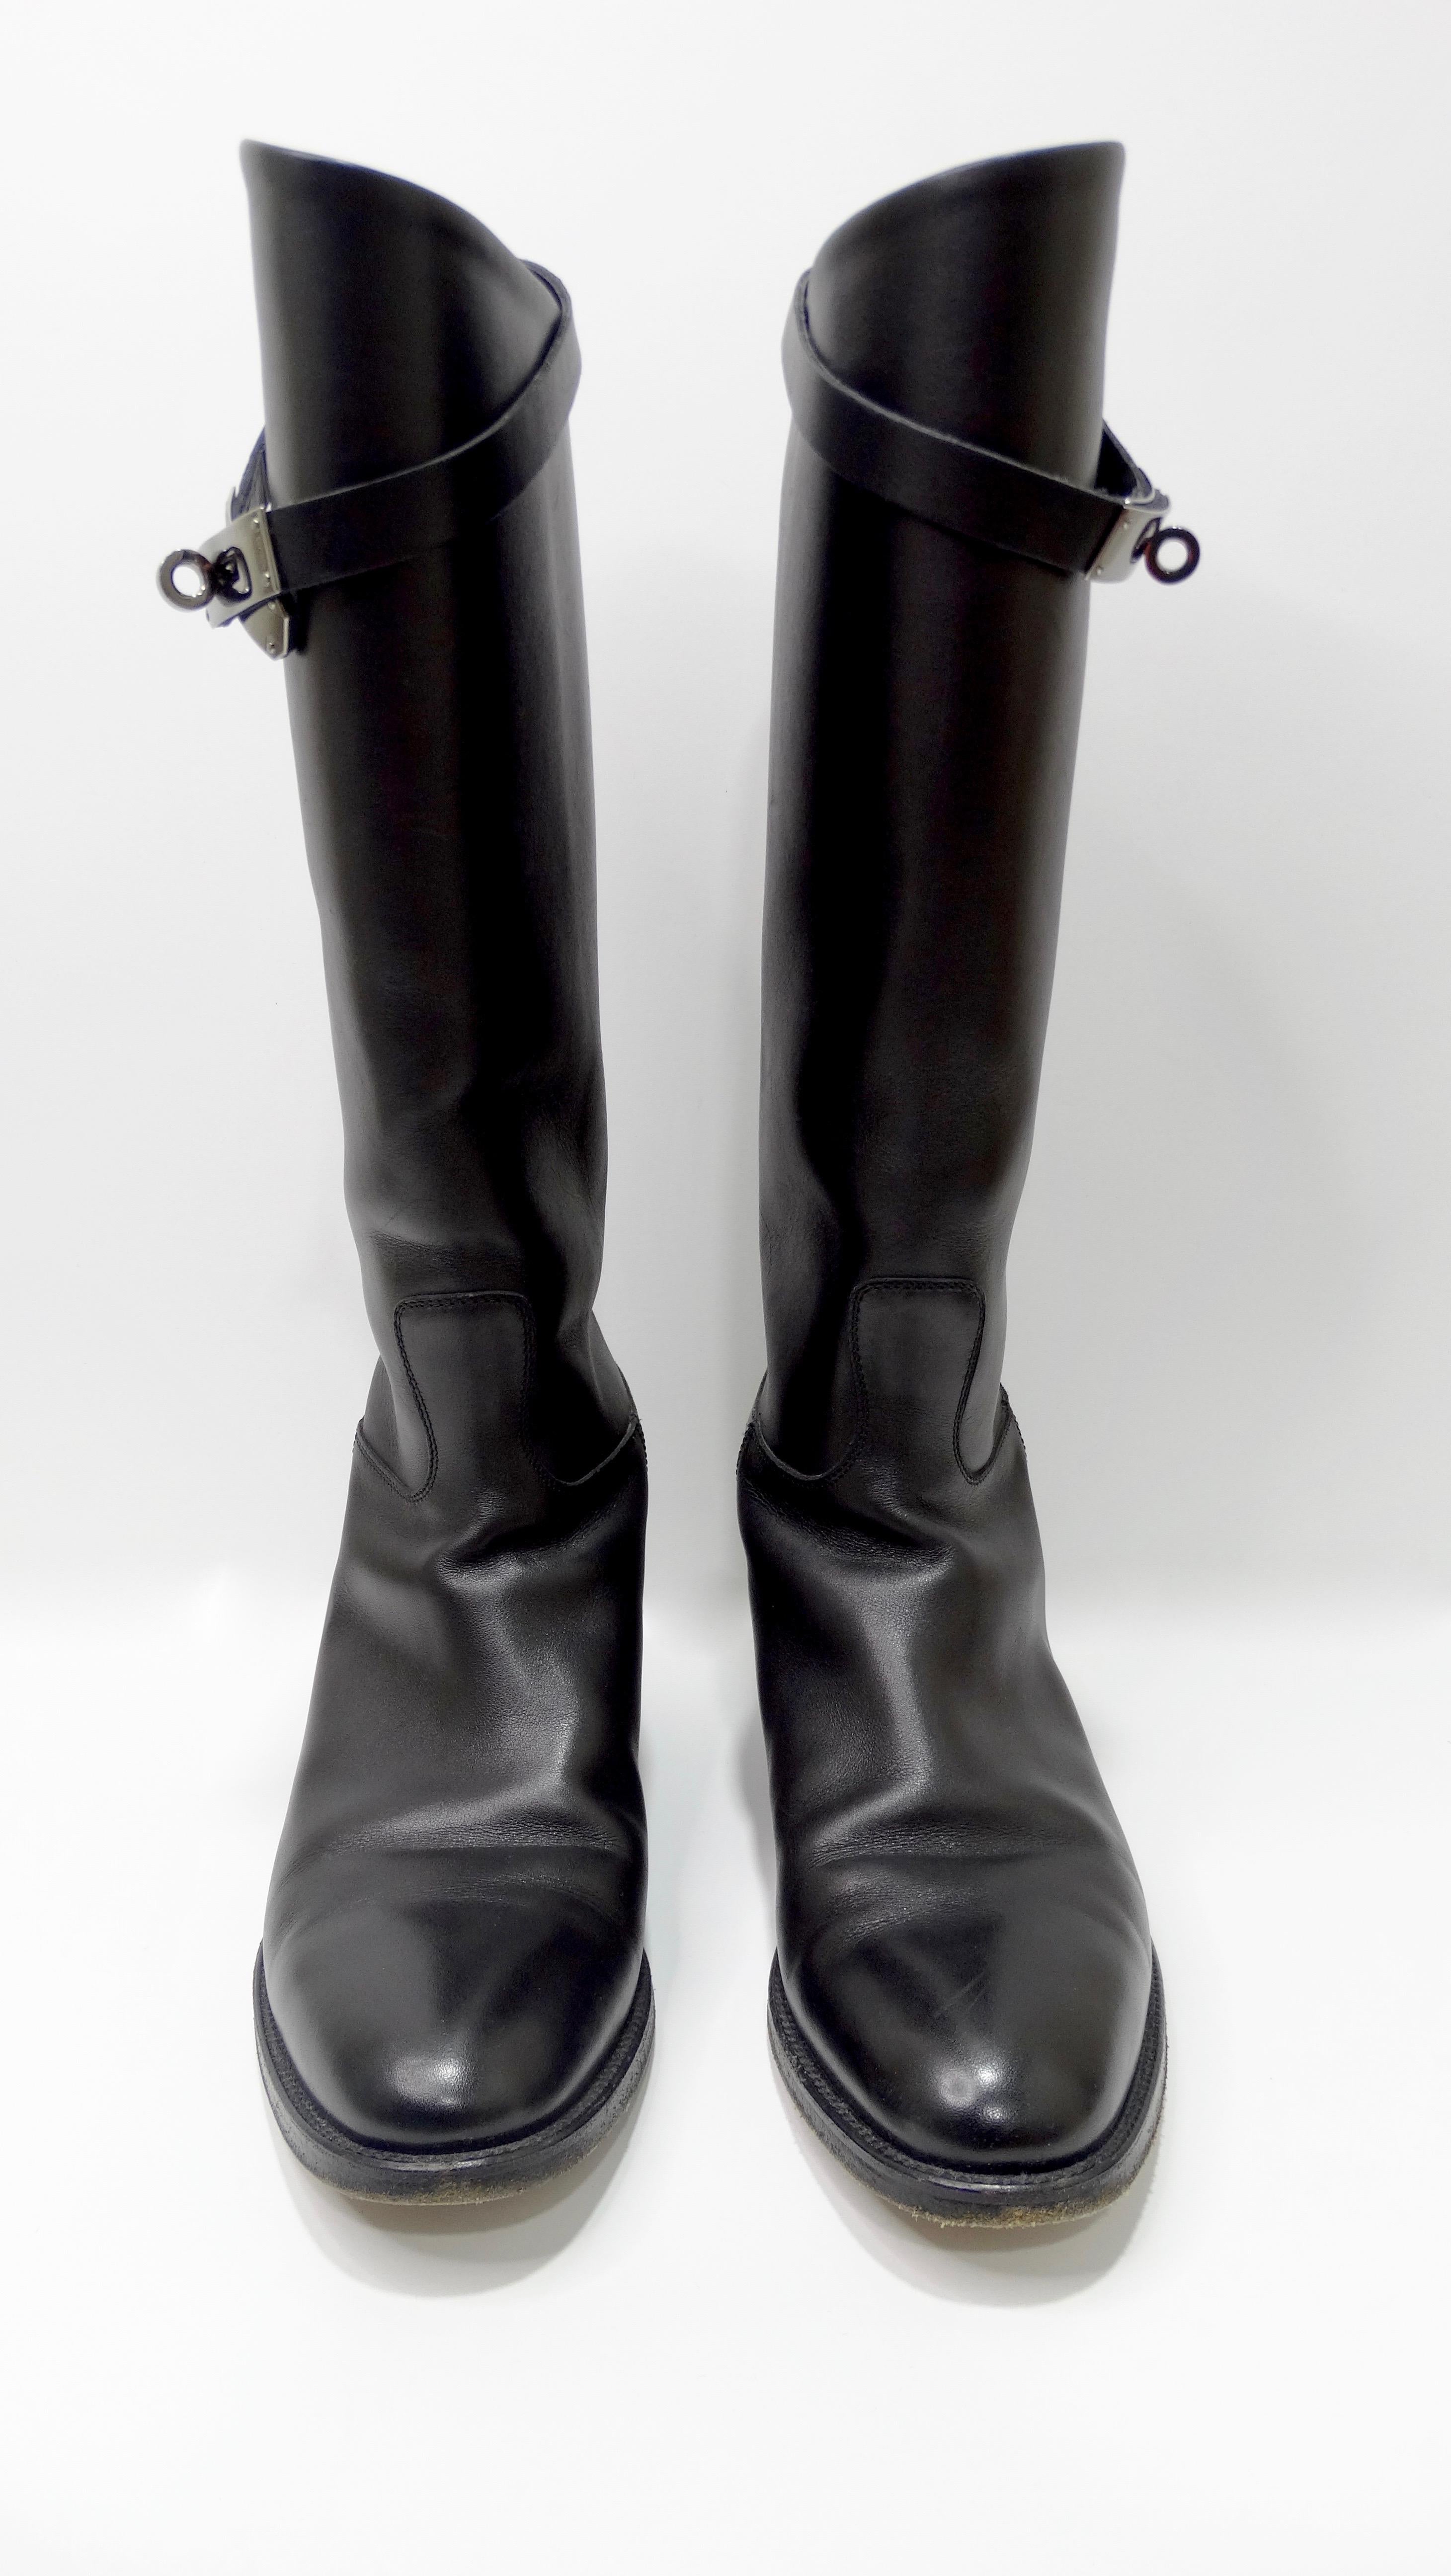 Now these boots were made for walking! Crafted from black box calfskin leather with a Kelly strap in Palladium hardware and a stacked heel, these jumping boots give a nod to the brands Equestrian roots. Interior is lined with calfskin leather and